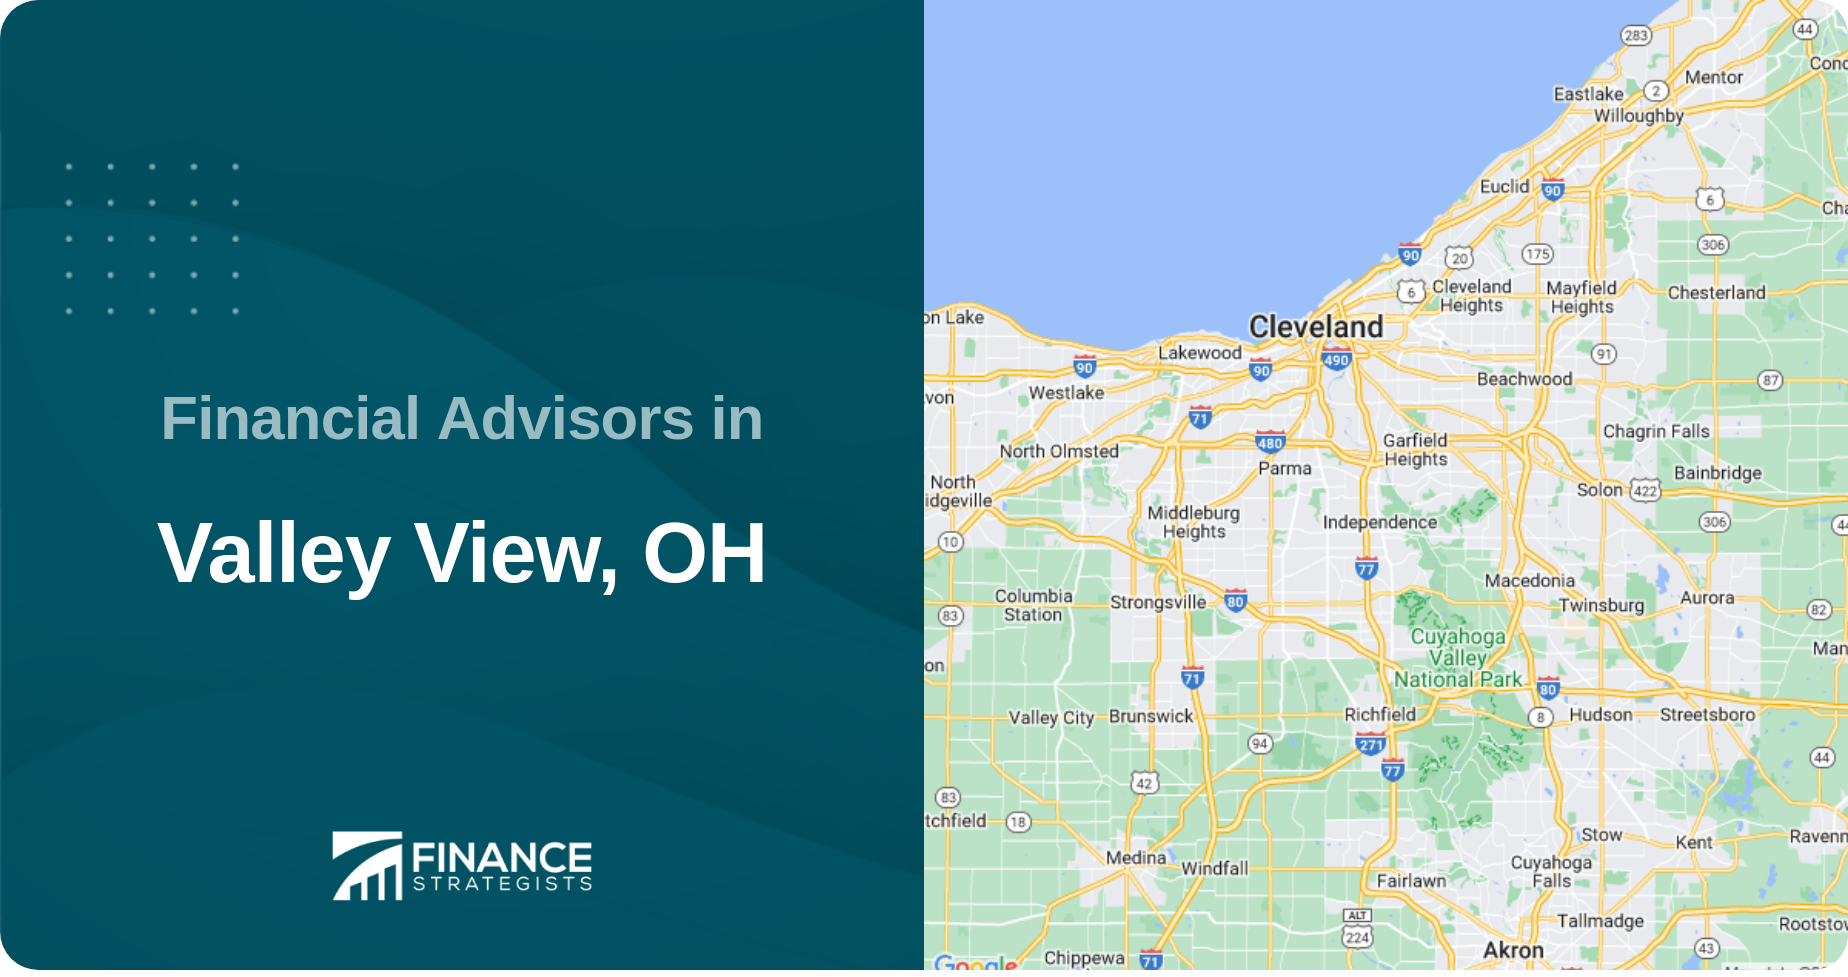 Financial Advisors in Valley View, OH